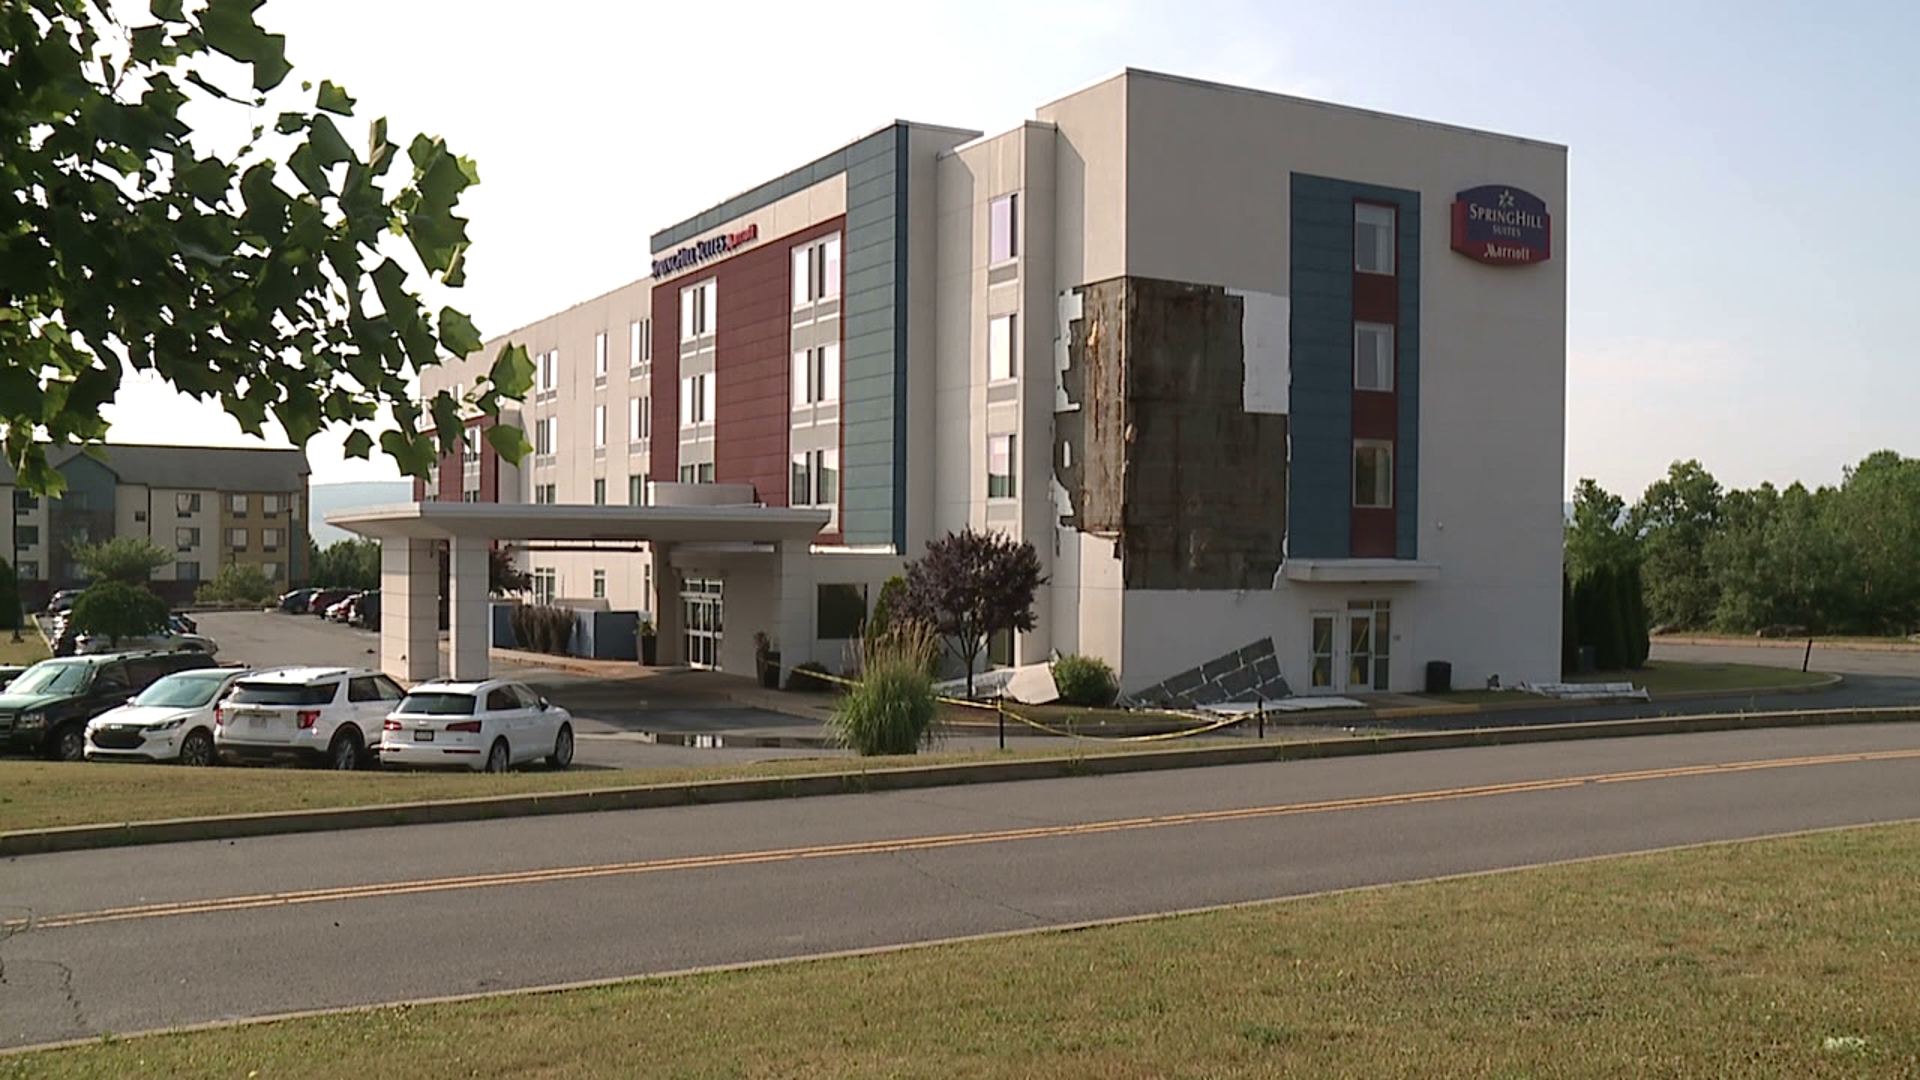 Fire crews responded to SpringHill Suites in Moosic Saturday afternoon after part of an exterior wall collapsed.